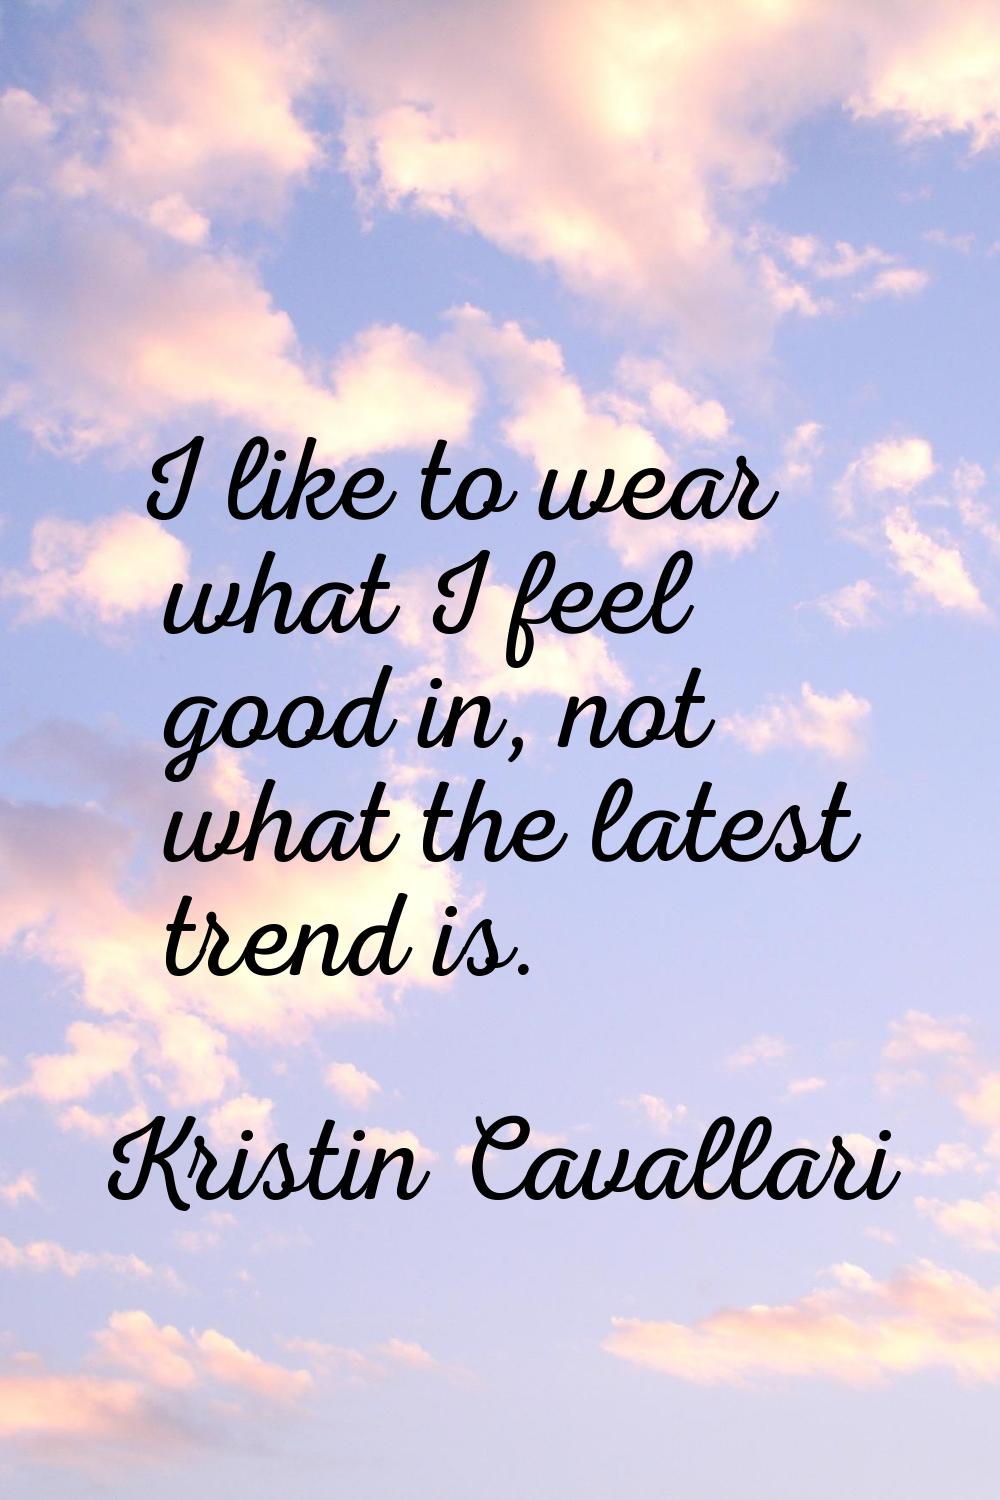 I like to wear what I feel good in, not what the latest trend is.